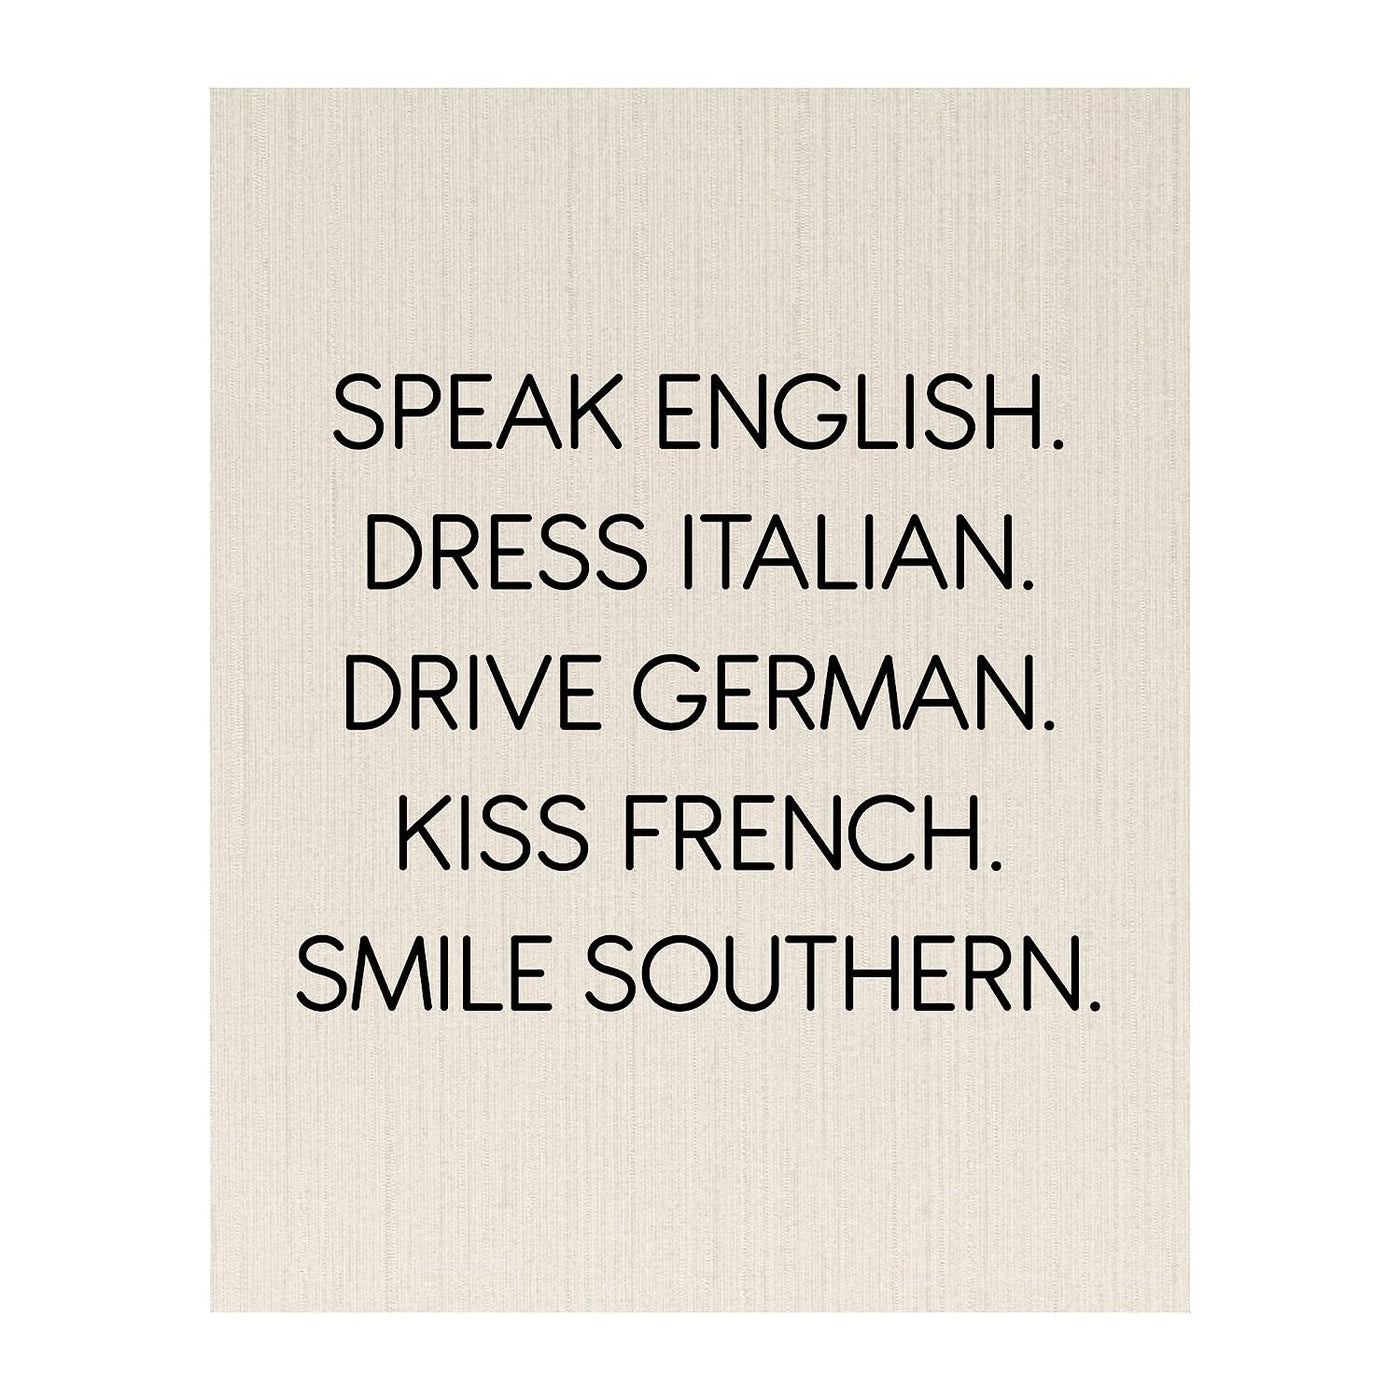 Speak English-Dress Italian-Kiss French-Smile Southern Funny Inspirational Wall Sign -8 x 10" Typography Art Print-Ready to Frame. Home-Office-Desk-Studio Decor. Fun Gift for Friends & Family!